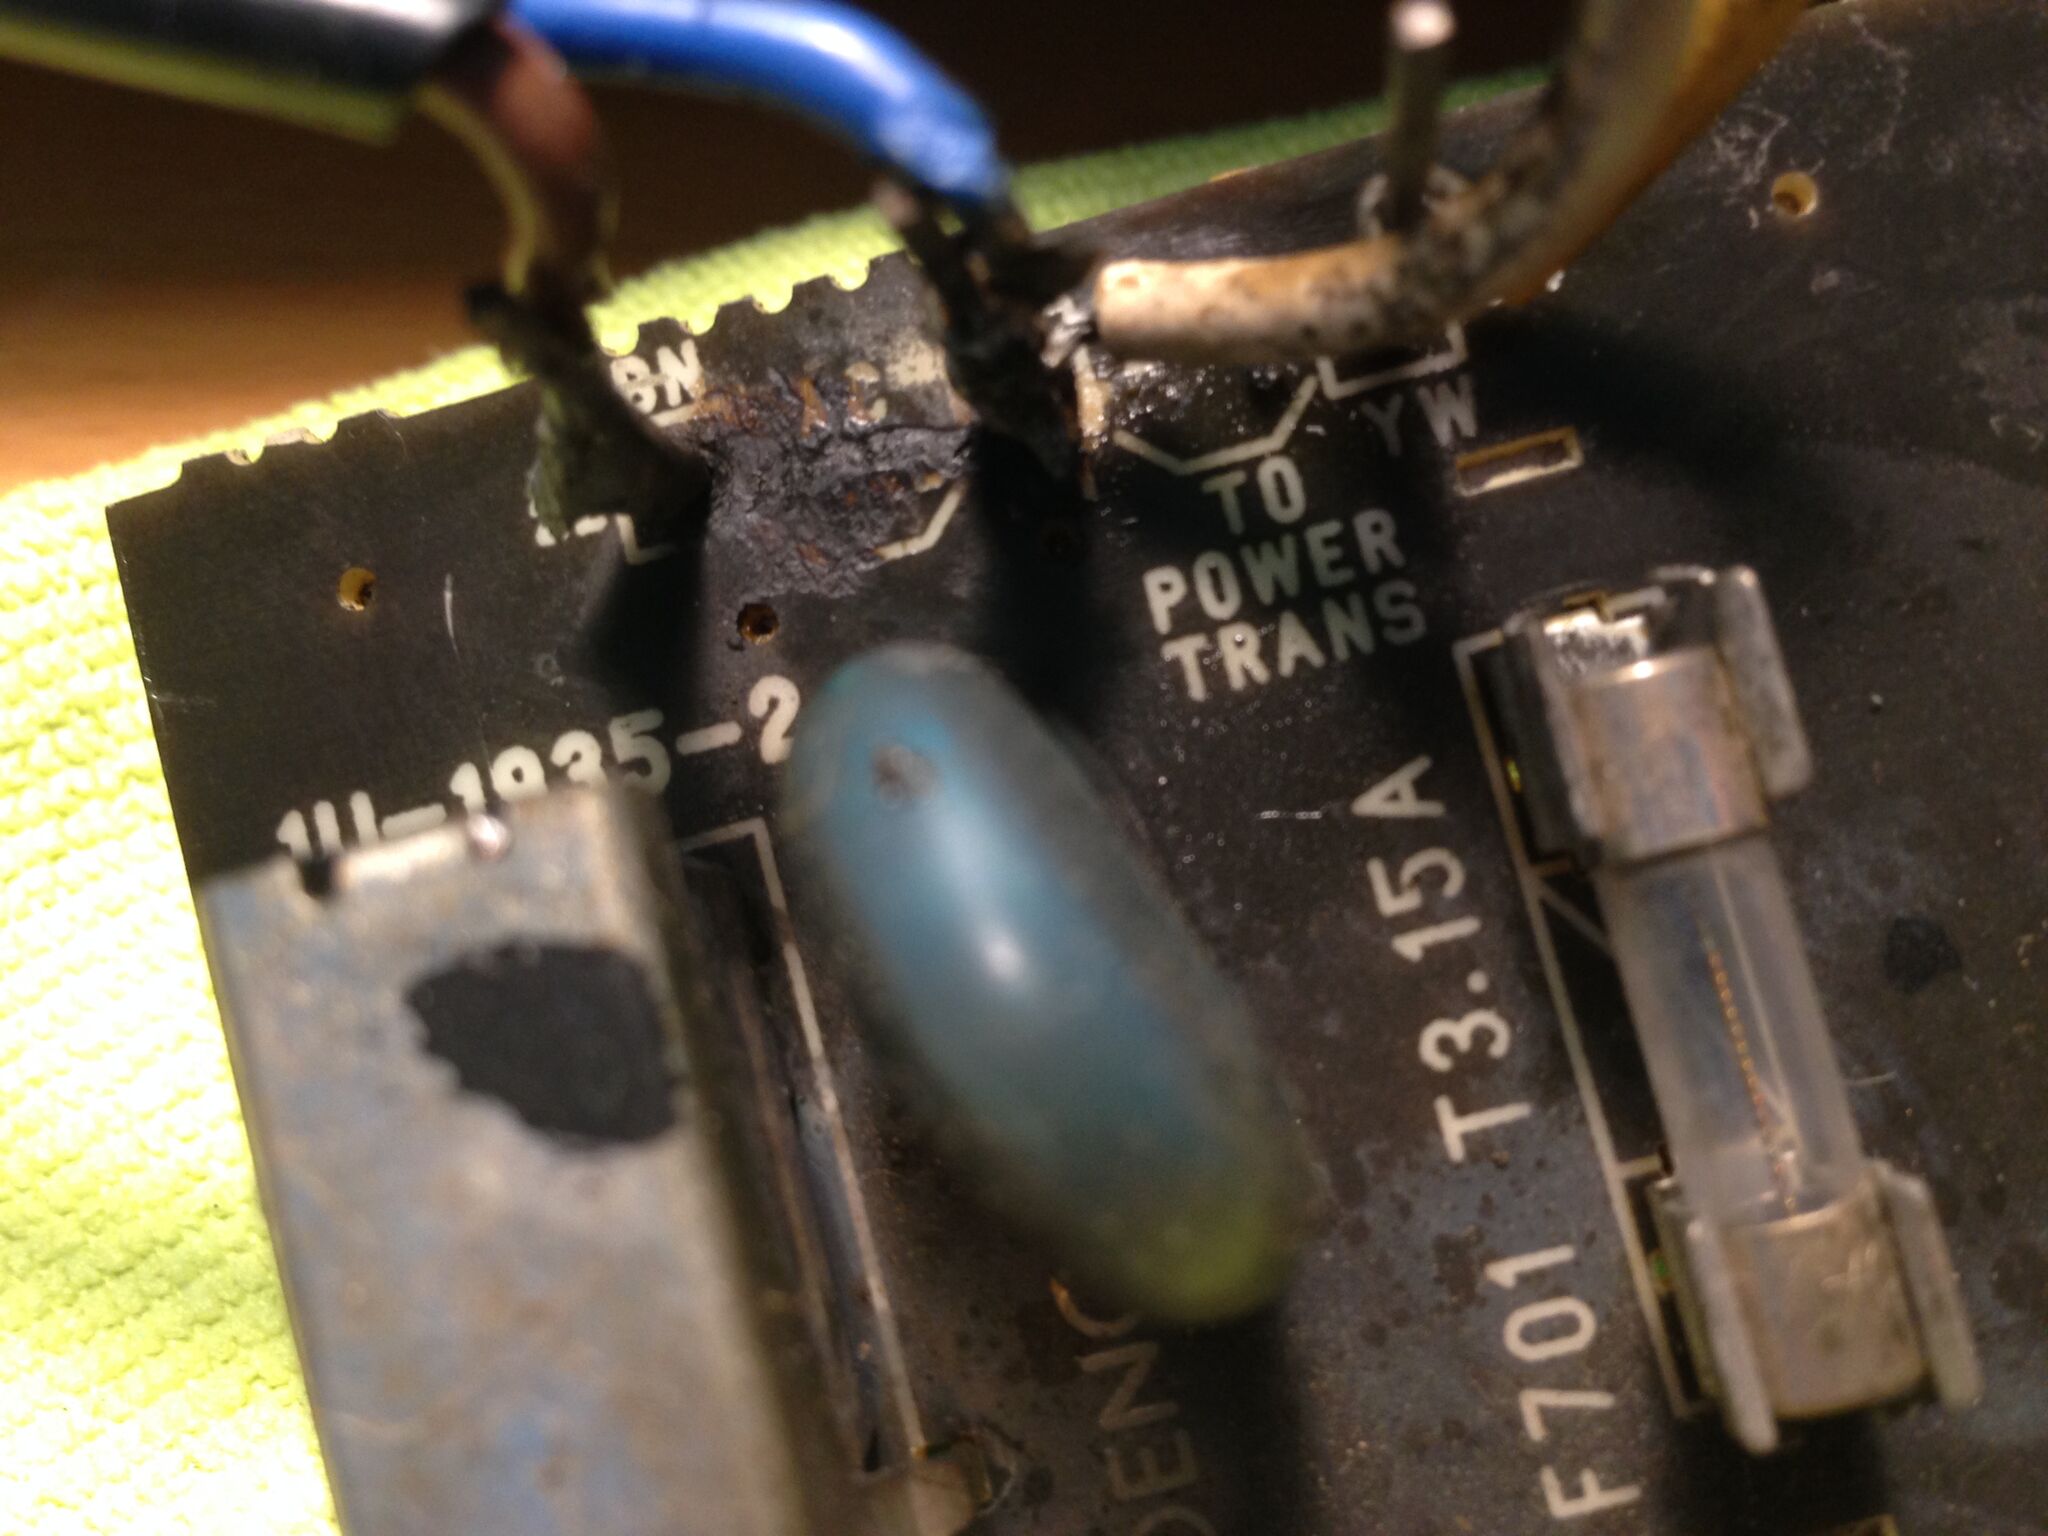 Scorch marks on the power button PCB